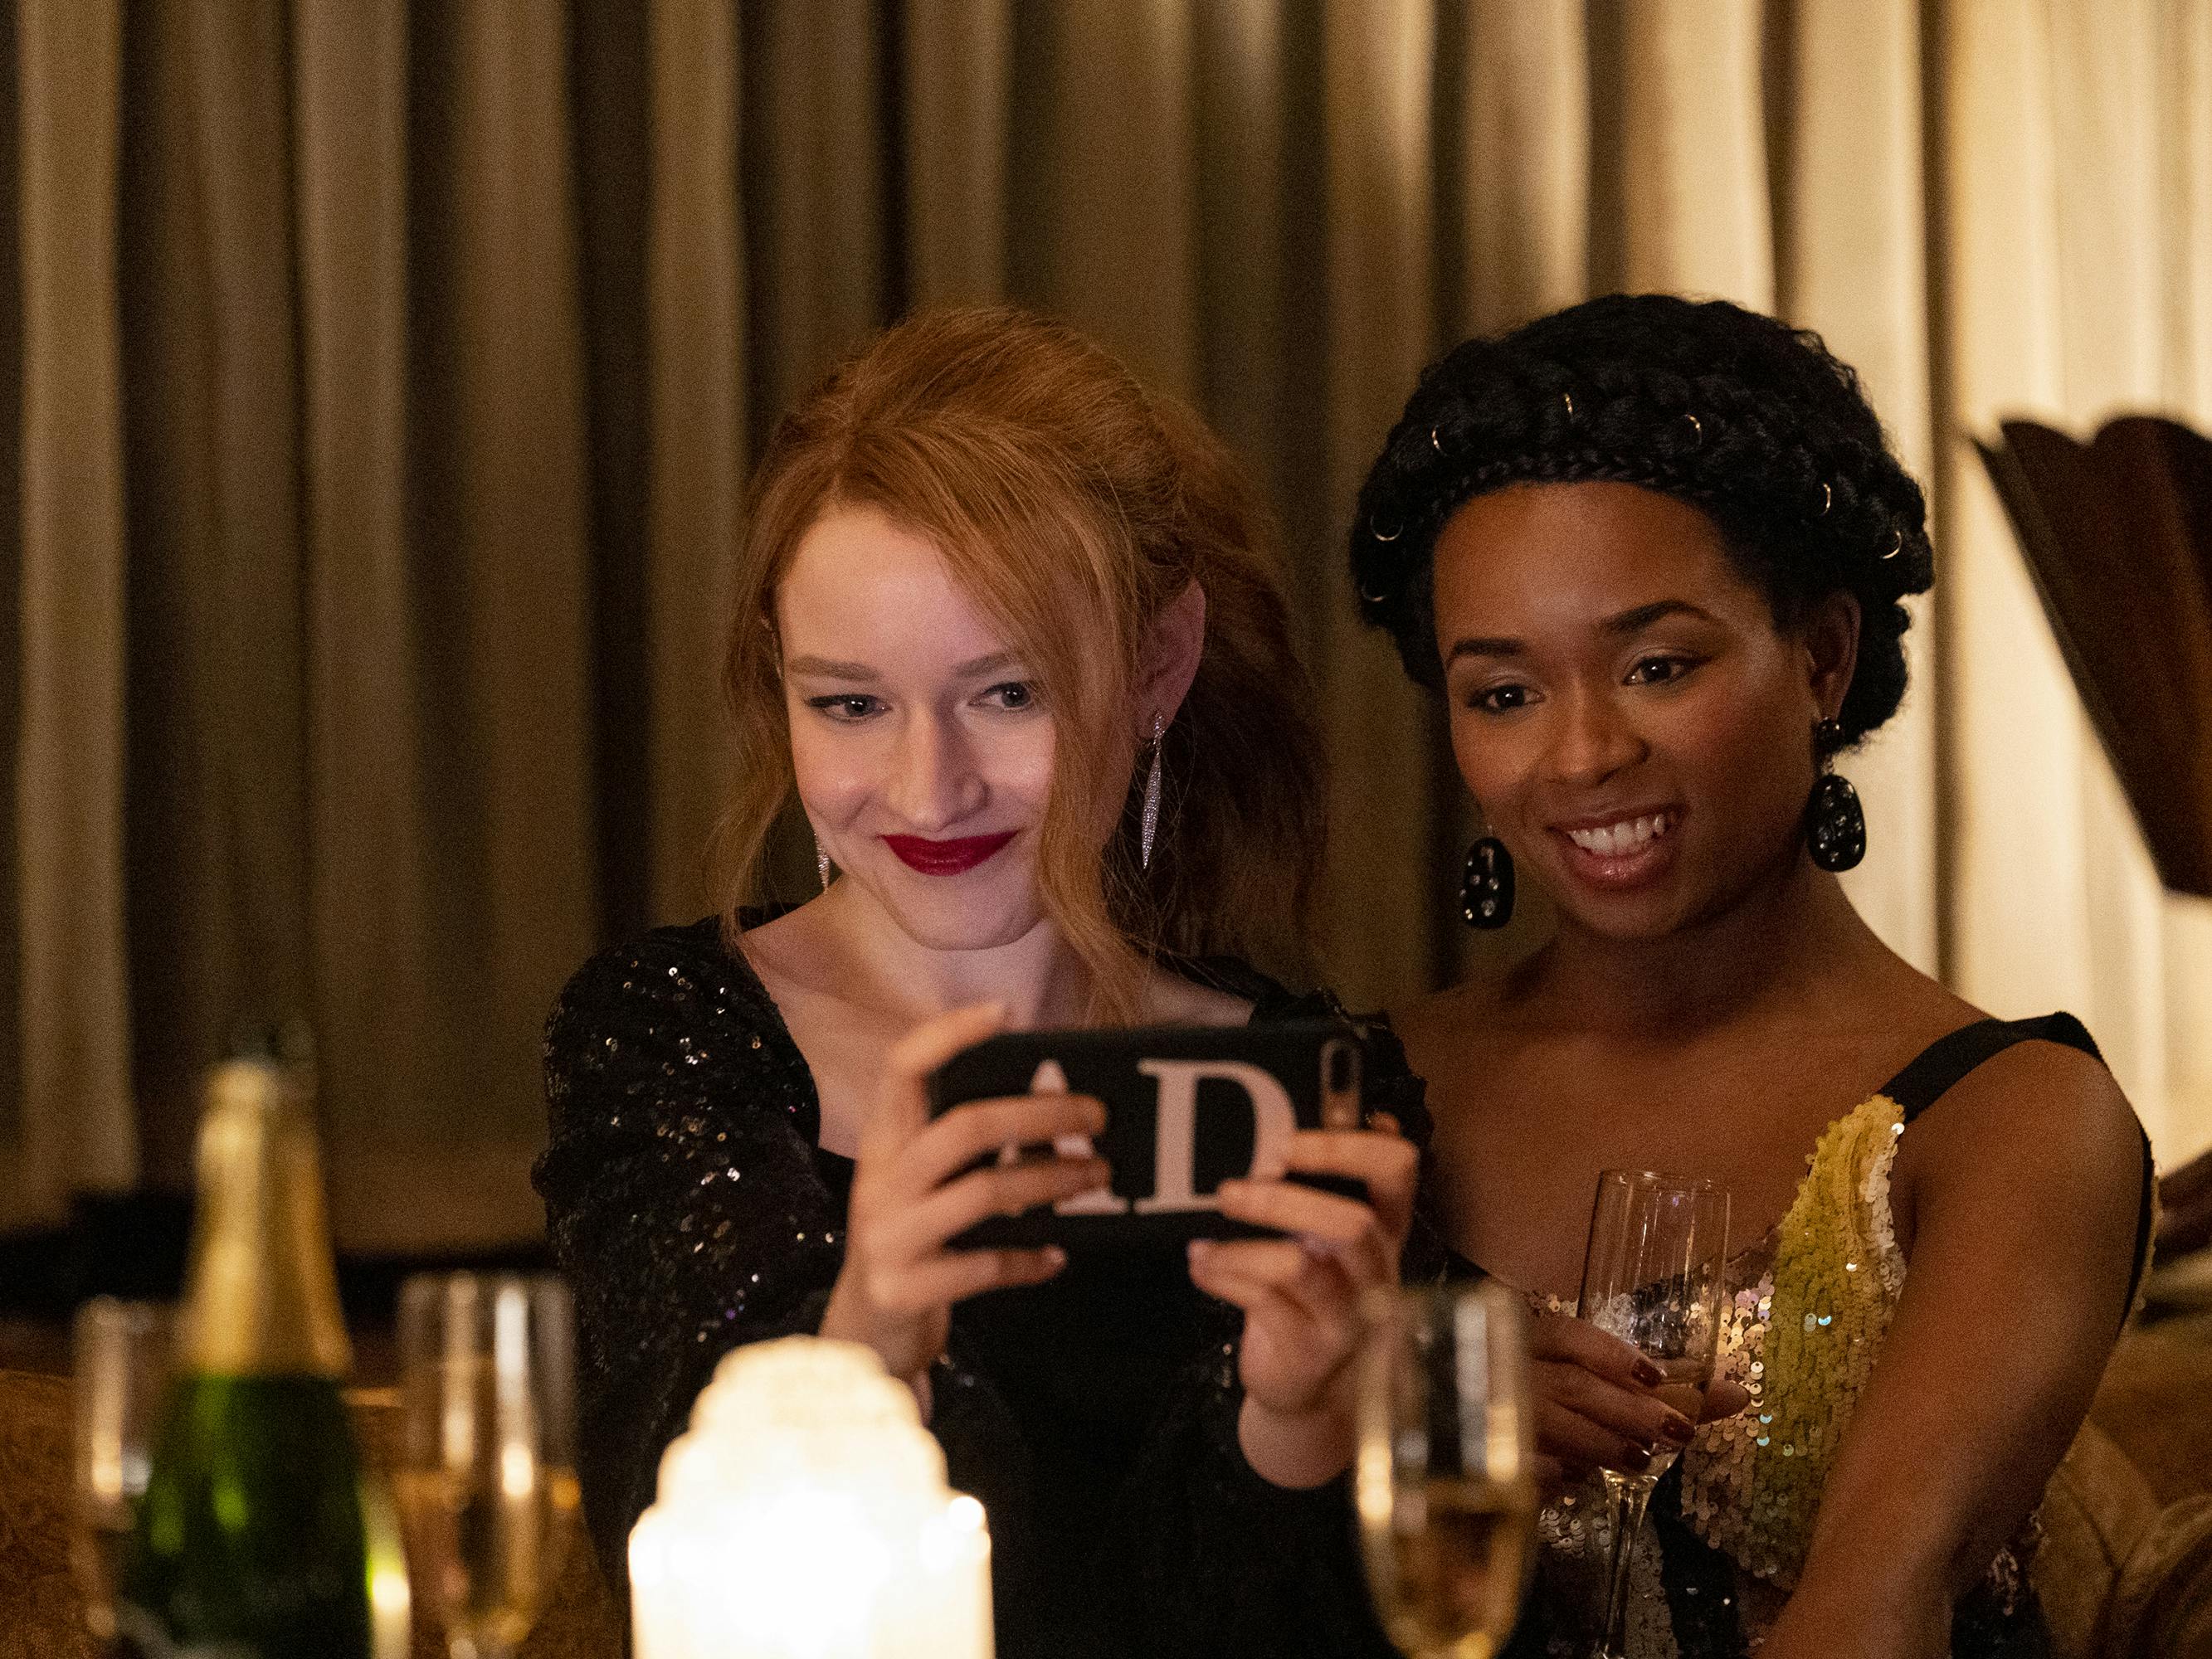 Julia Garner as Anna Delvy and Alexis Floyd as Neff Davis sit in a bar and pose for a selfie while surrounded by champagne bottles and flutes.